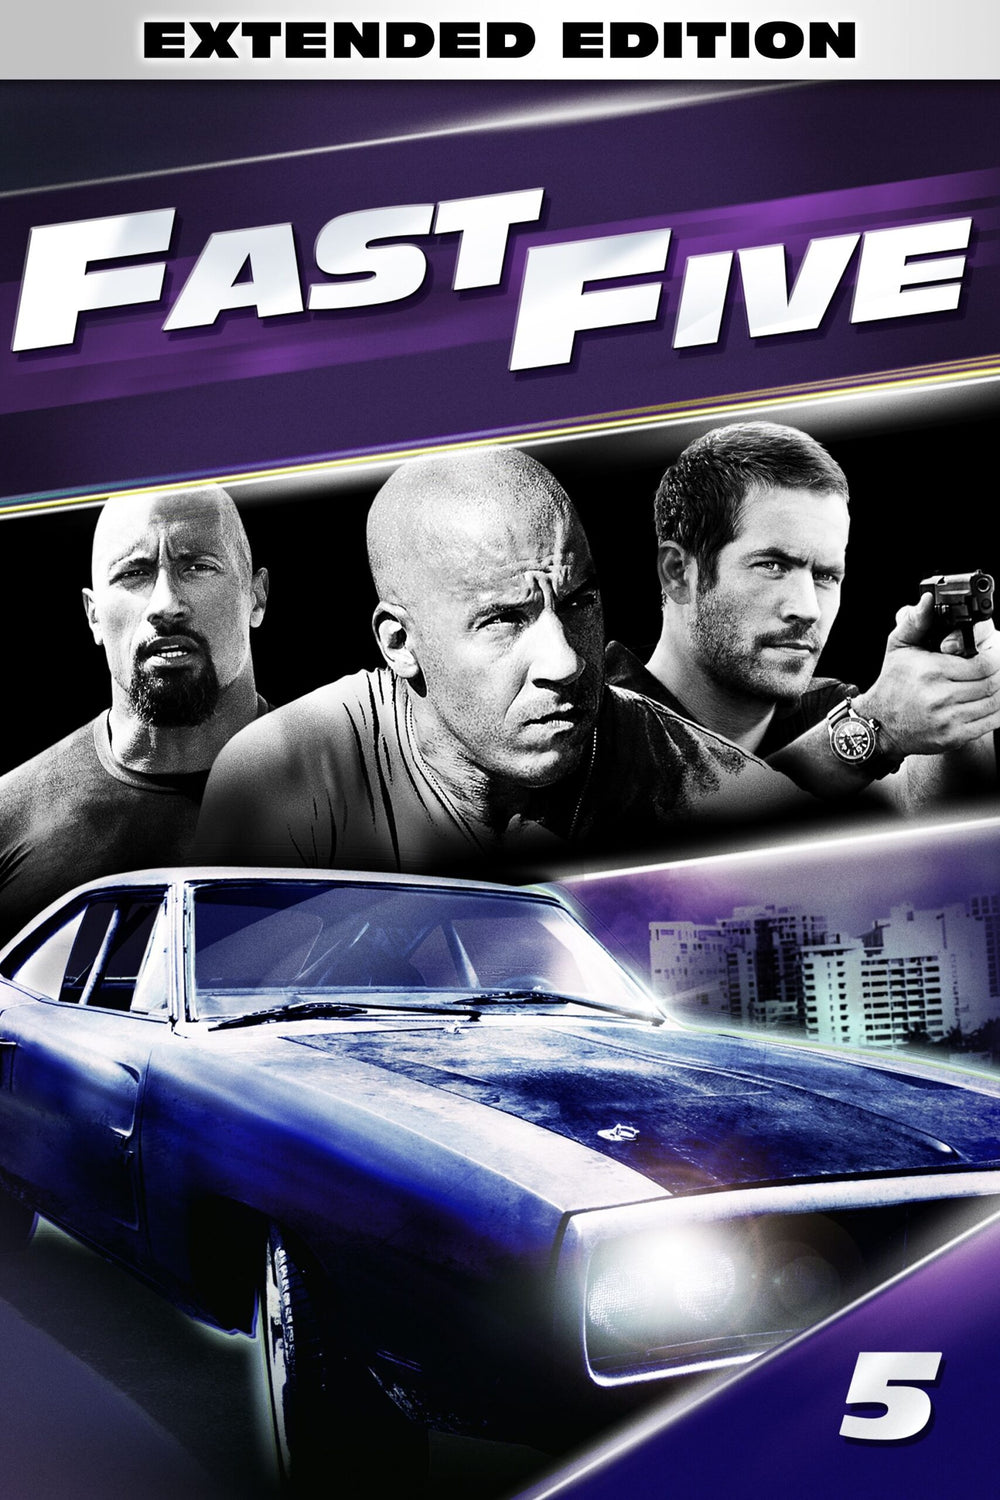 FAST 5 EXTENDED EDITION HD VUDU/Itunes Via Moviesanywhere